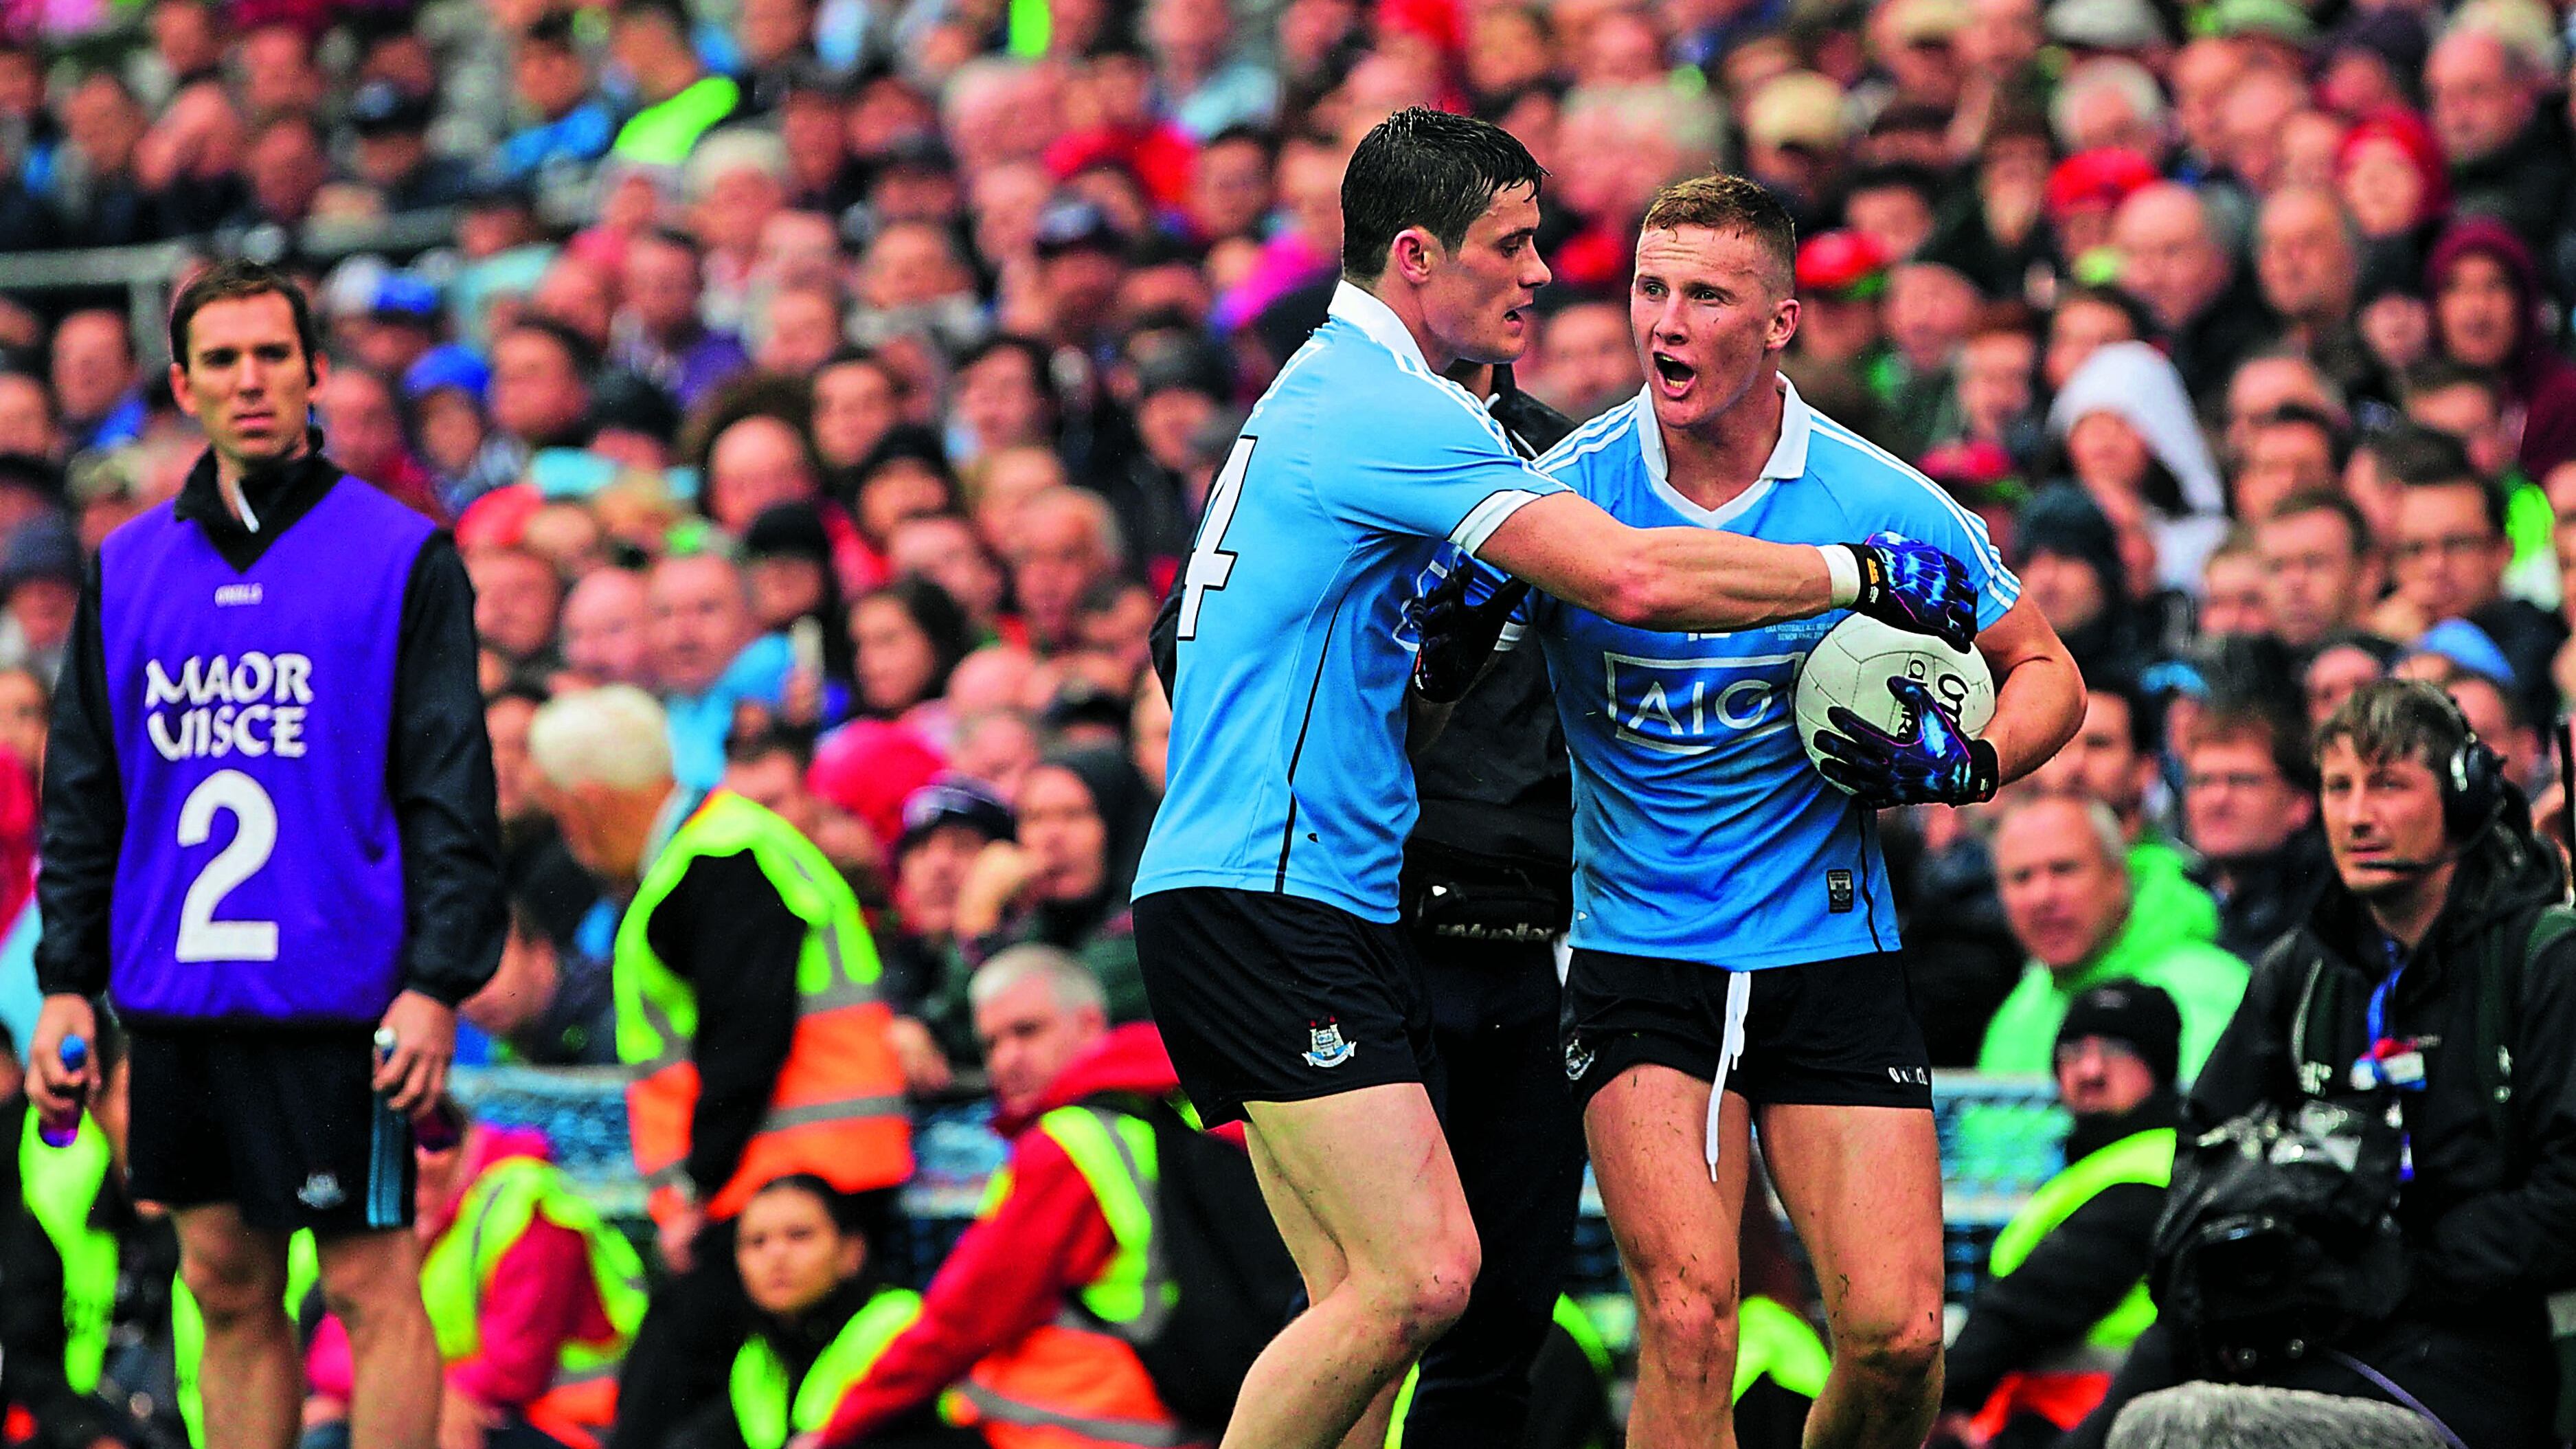 &nbsp;&nbsp;Dublin&rsquo;s Diarmuid Connolly wrestles the ball off team-mate Ciaran Kilkenny so he can take a sideline ball late on in yesterday&rsquo;s All-Ireland final. Connolly&rsquo;s insistence on taking the kick led to possession being lost and gave Mayo the chance to salvage a draw deep in injury-time.&nbsp;Picture by Colm O&rsquo;Reilly